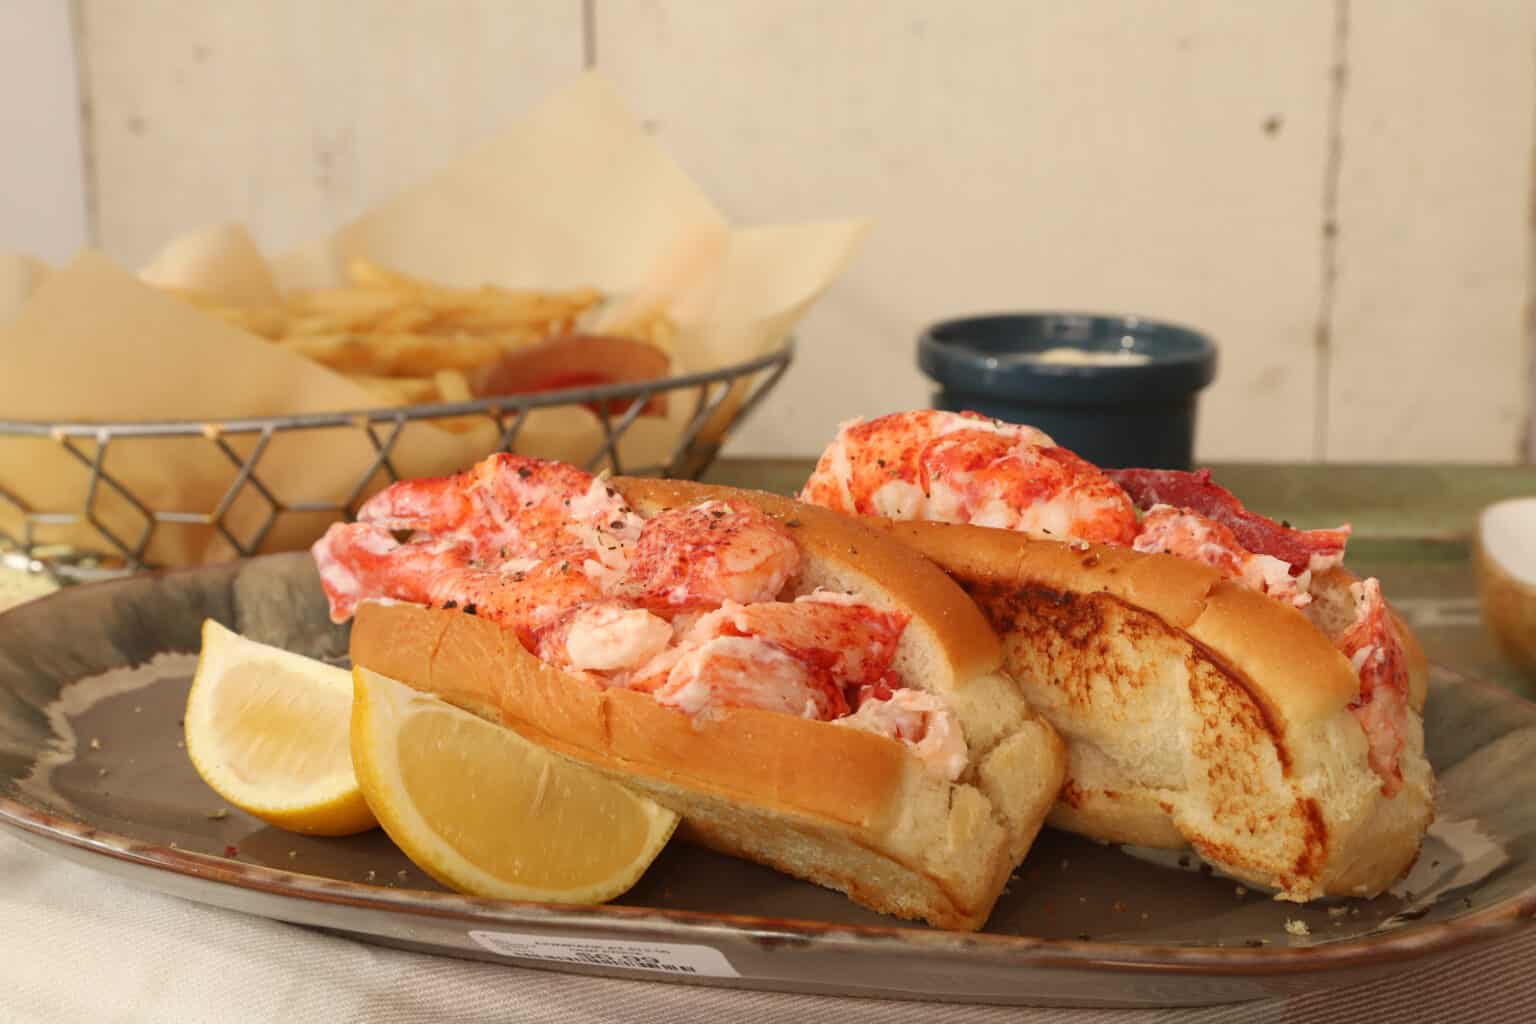 maine vs connecticut lobster roll